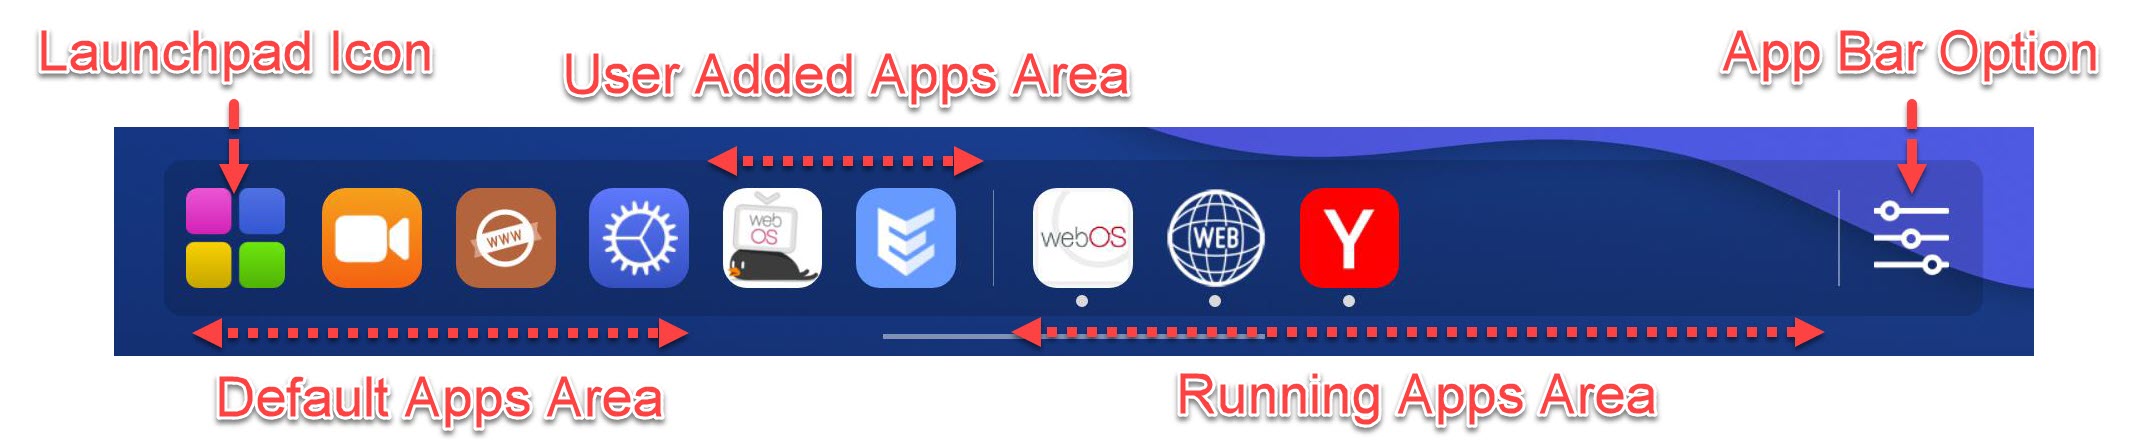 Components of the app bar